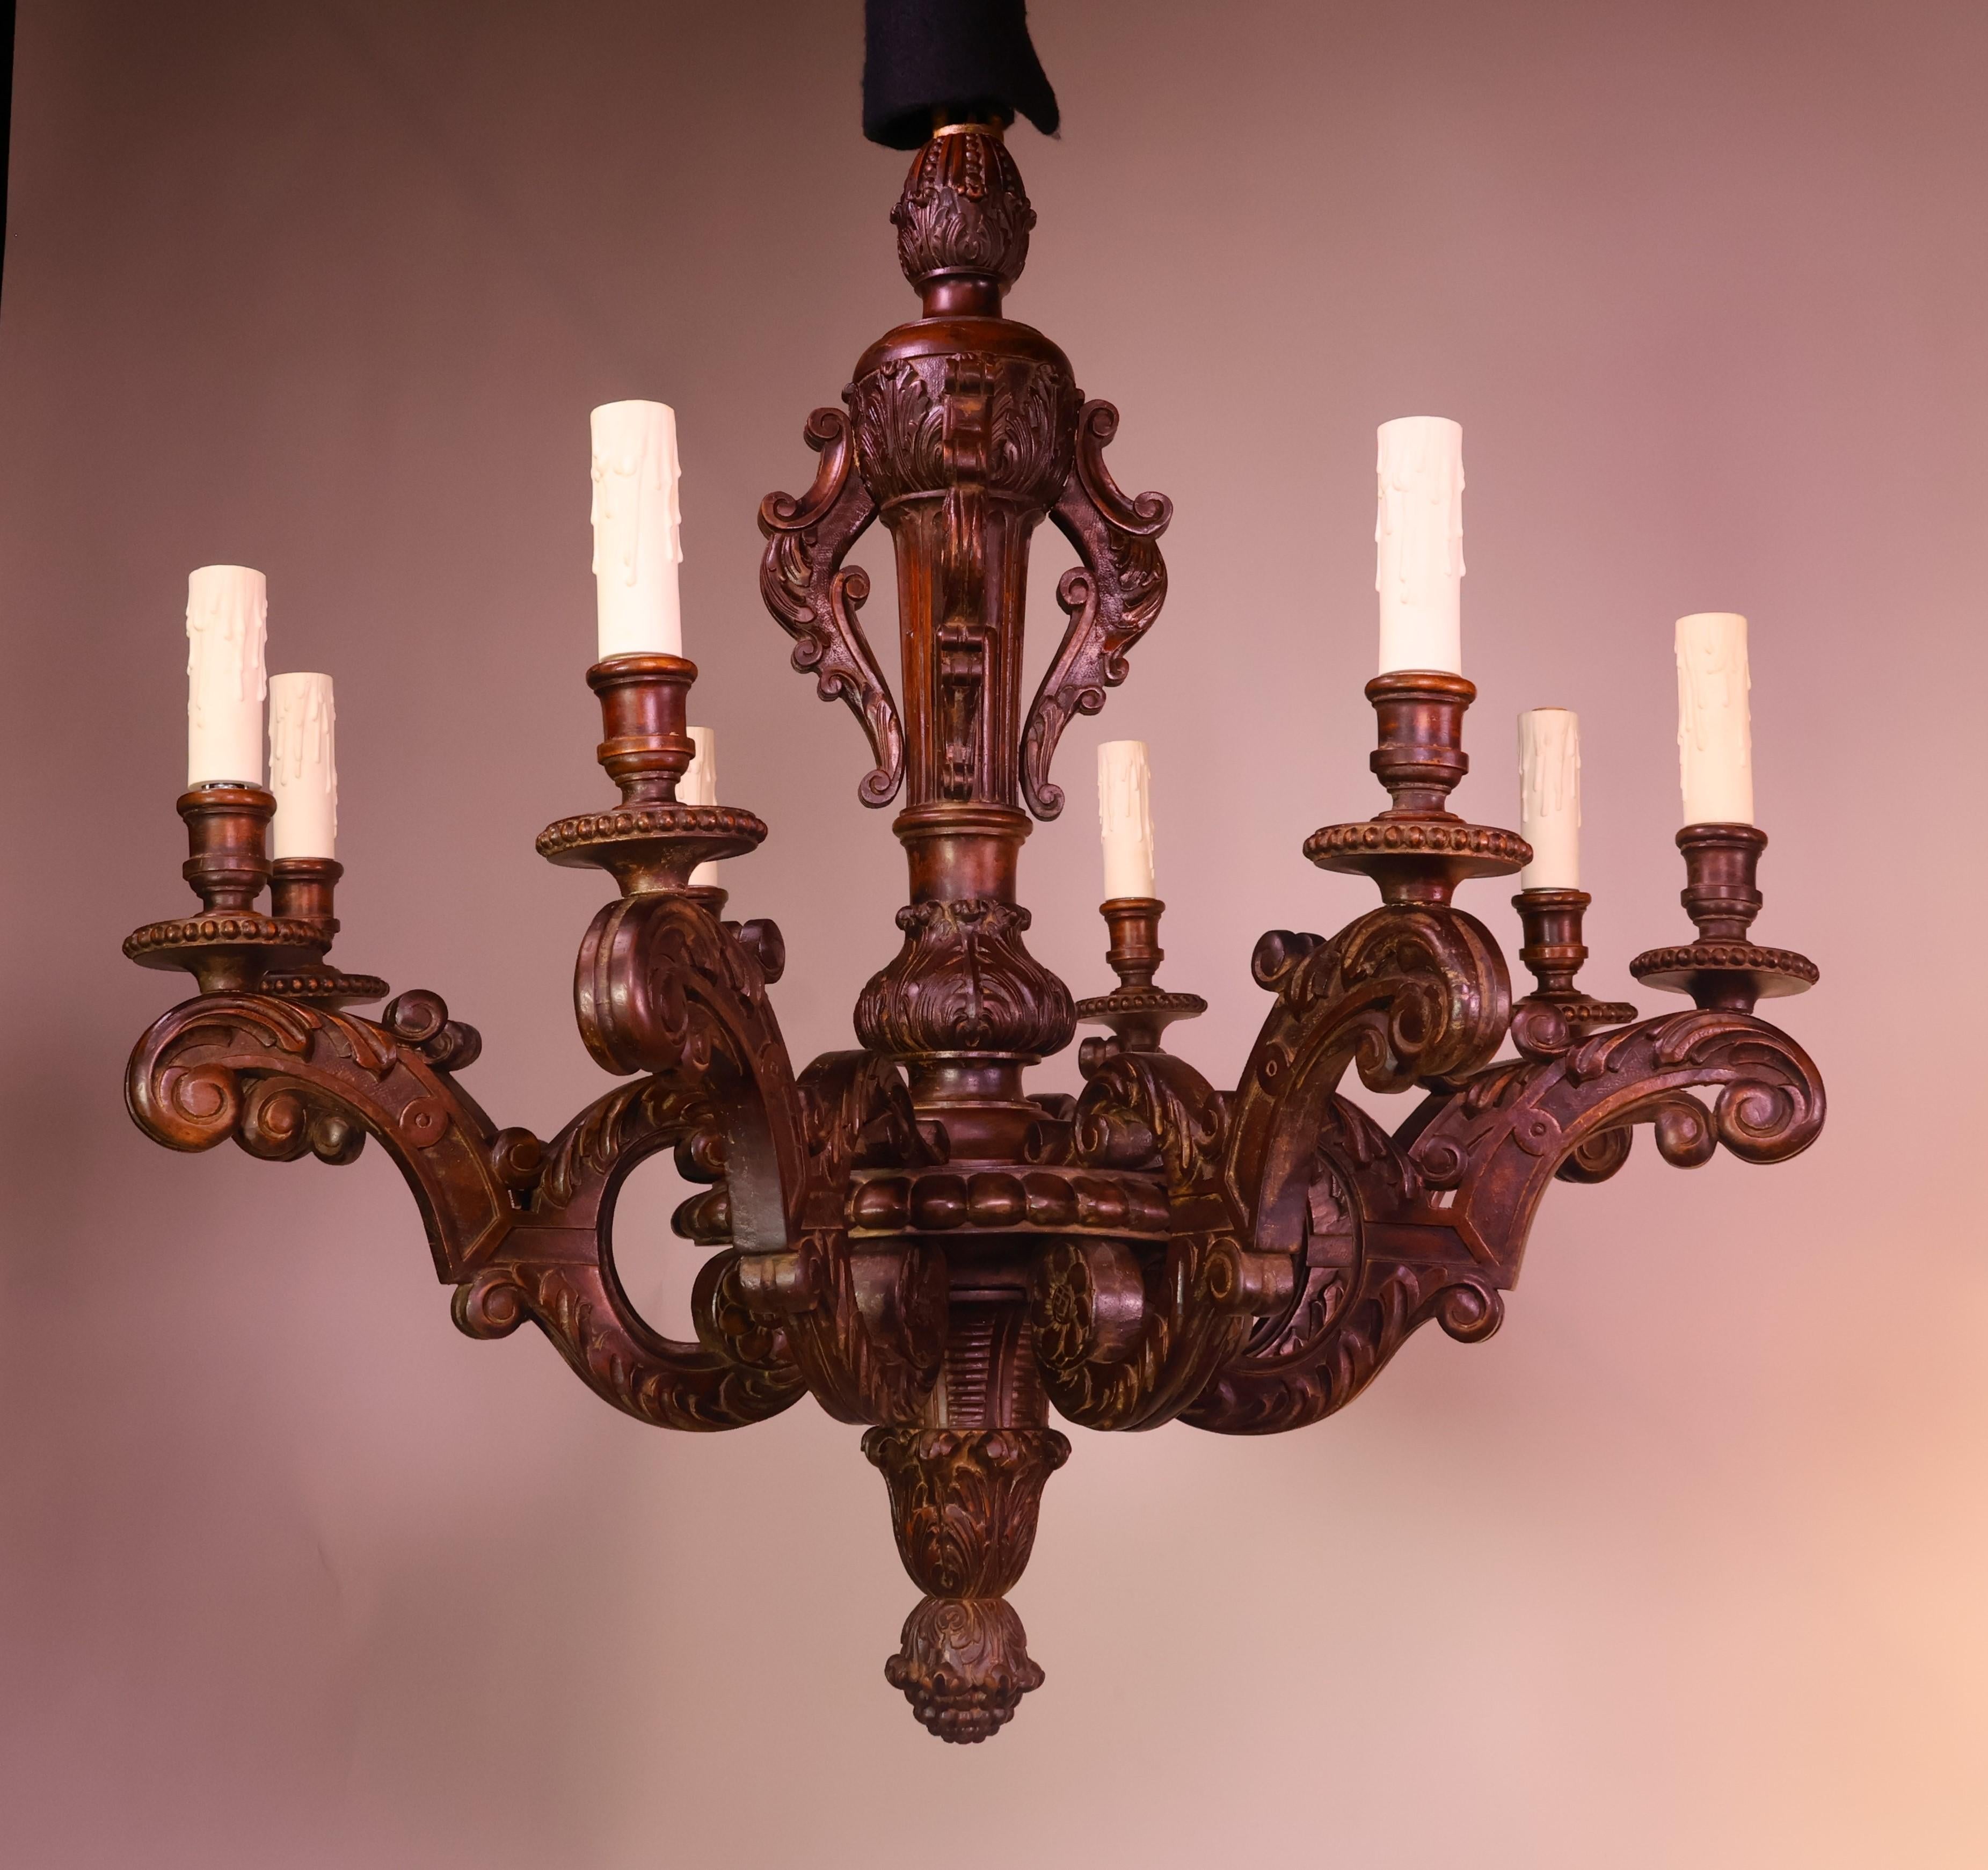 A Very Fine Carved Wood Chandelier in the Louis XVI style. 
8 lights. France, circa 1900.
CW5552